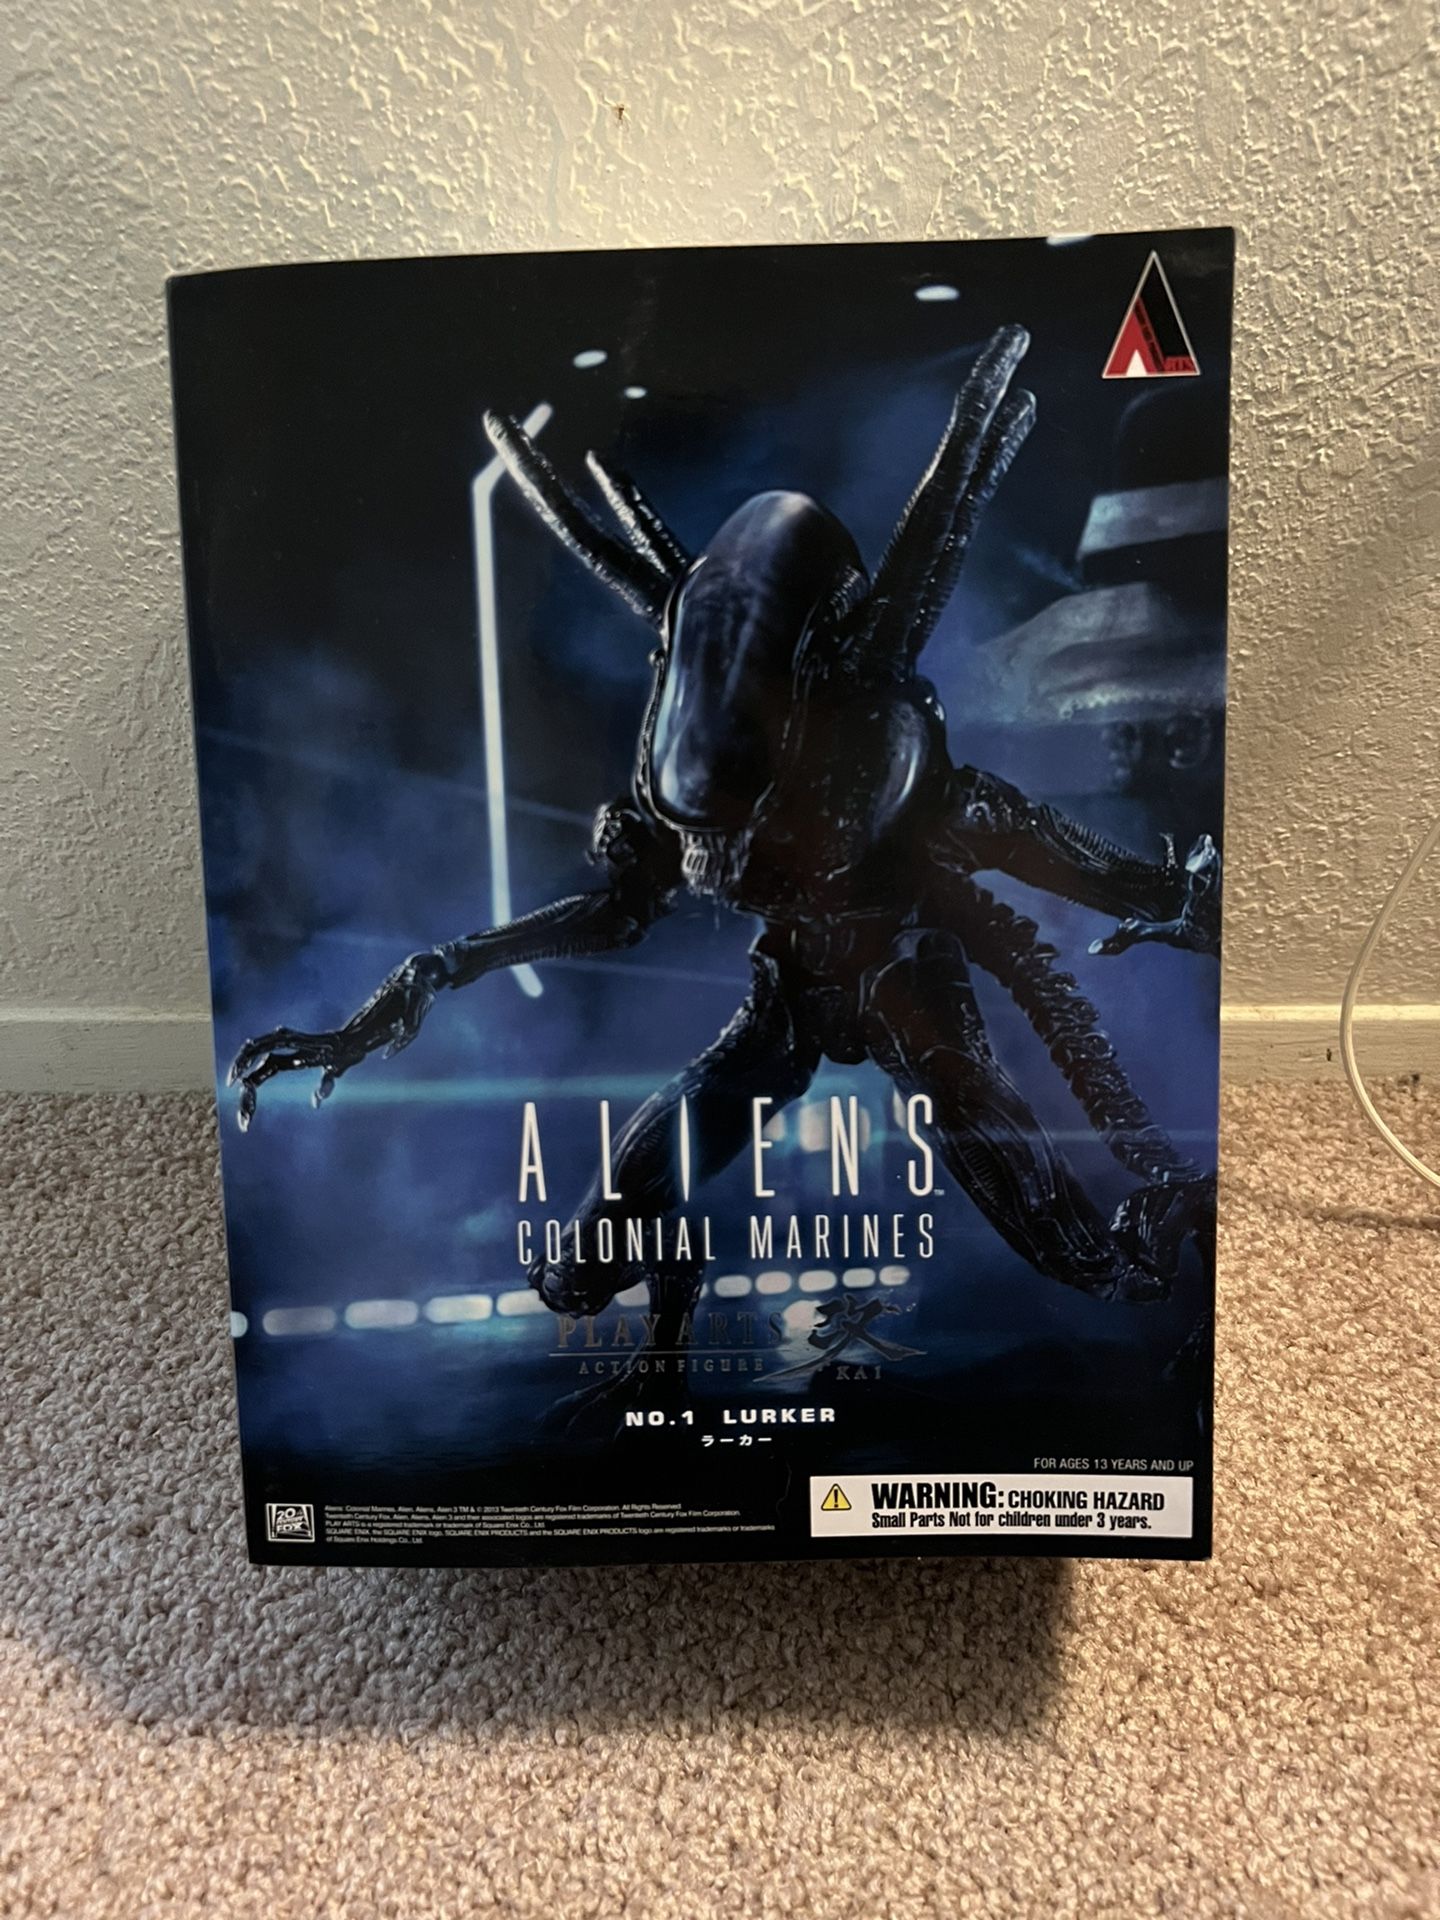 NECA Aliens Colonial Marines Action Figure - New Toys & Collectibles | Color: Black